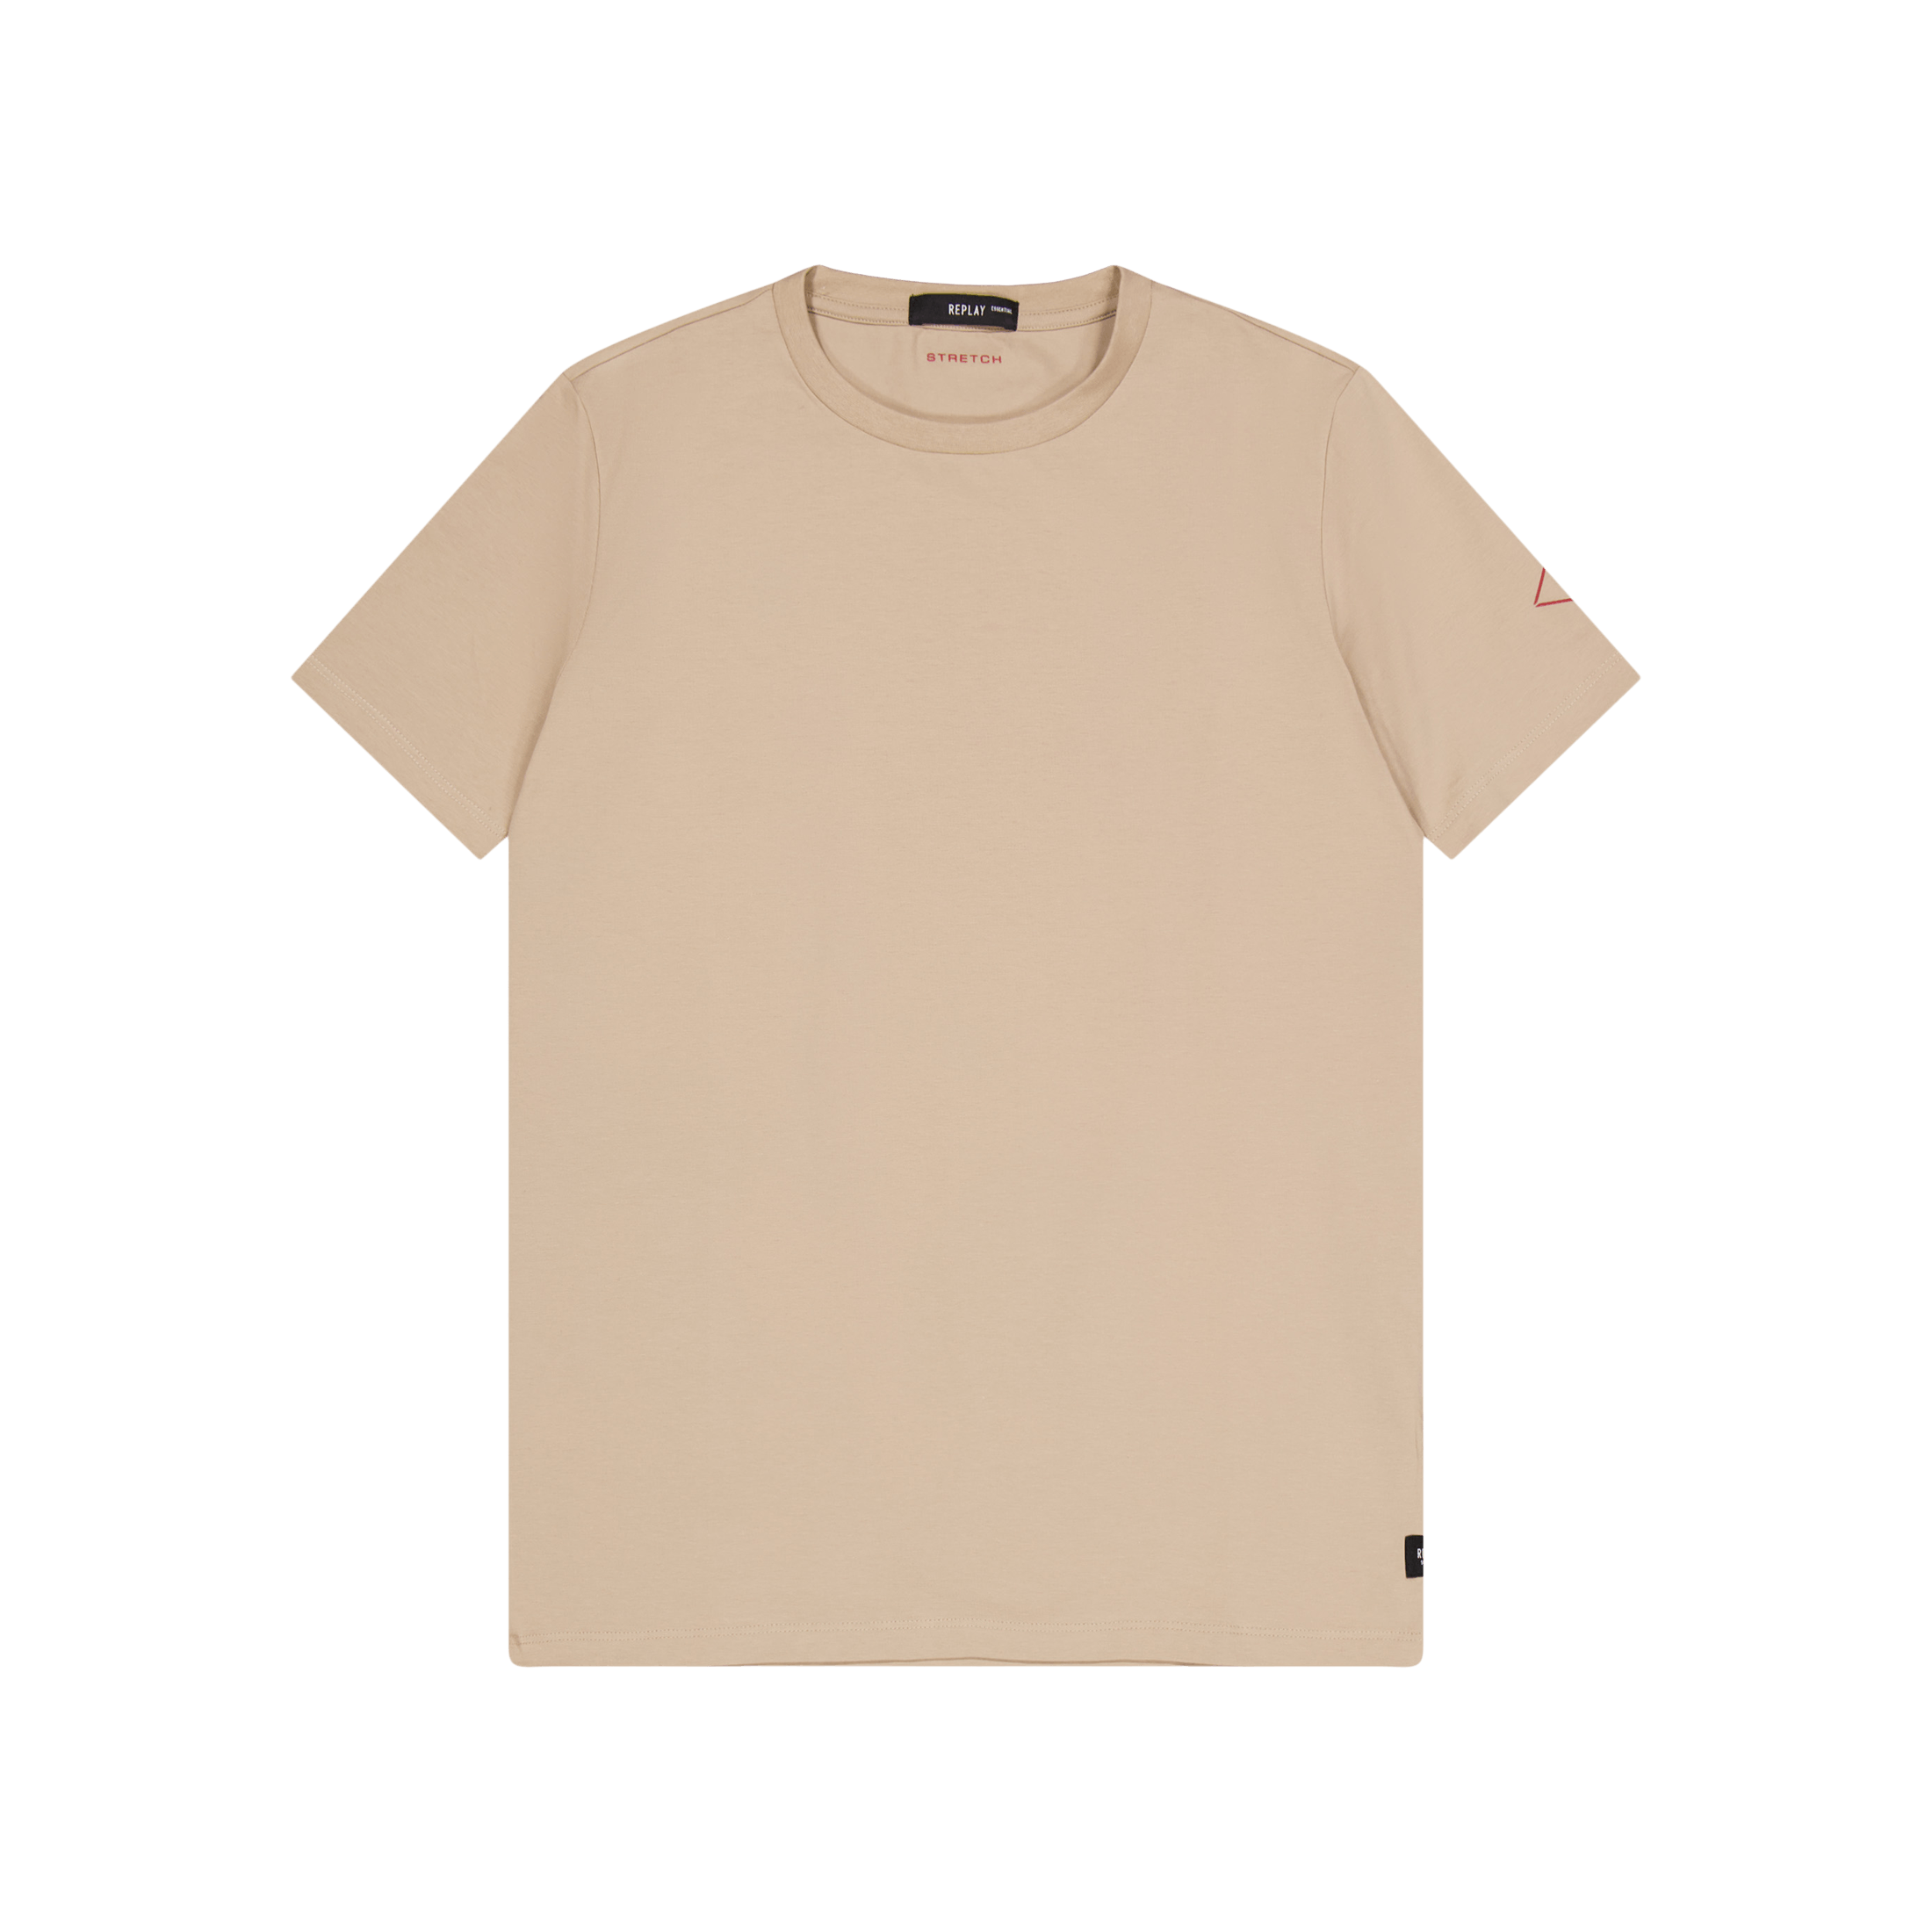 Taupe Replay 803 Replay - Stretch Tee – Light